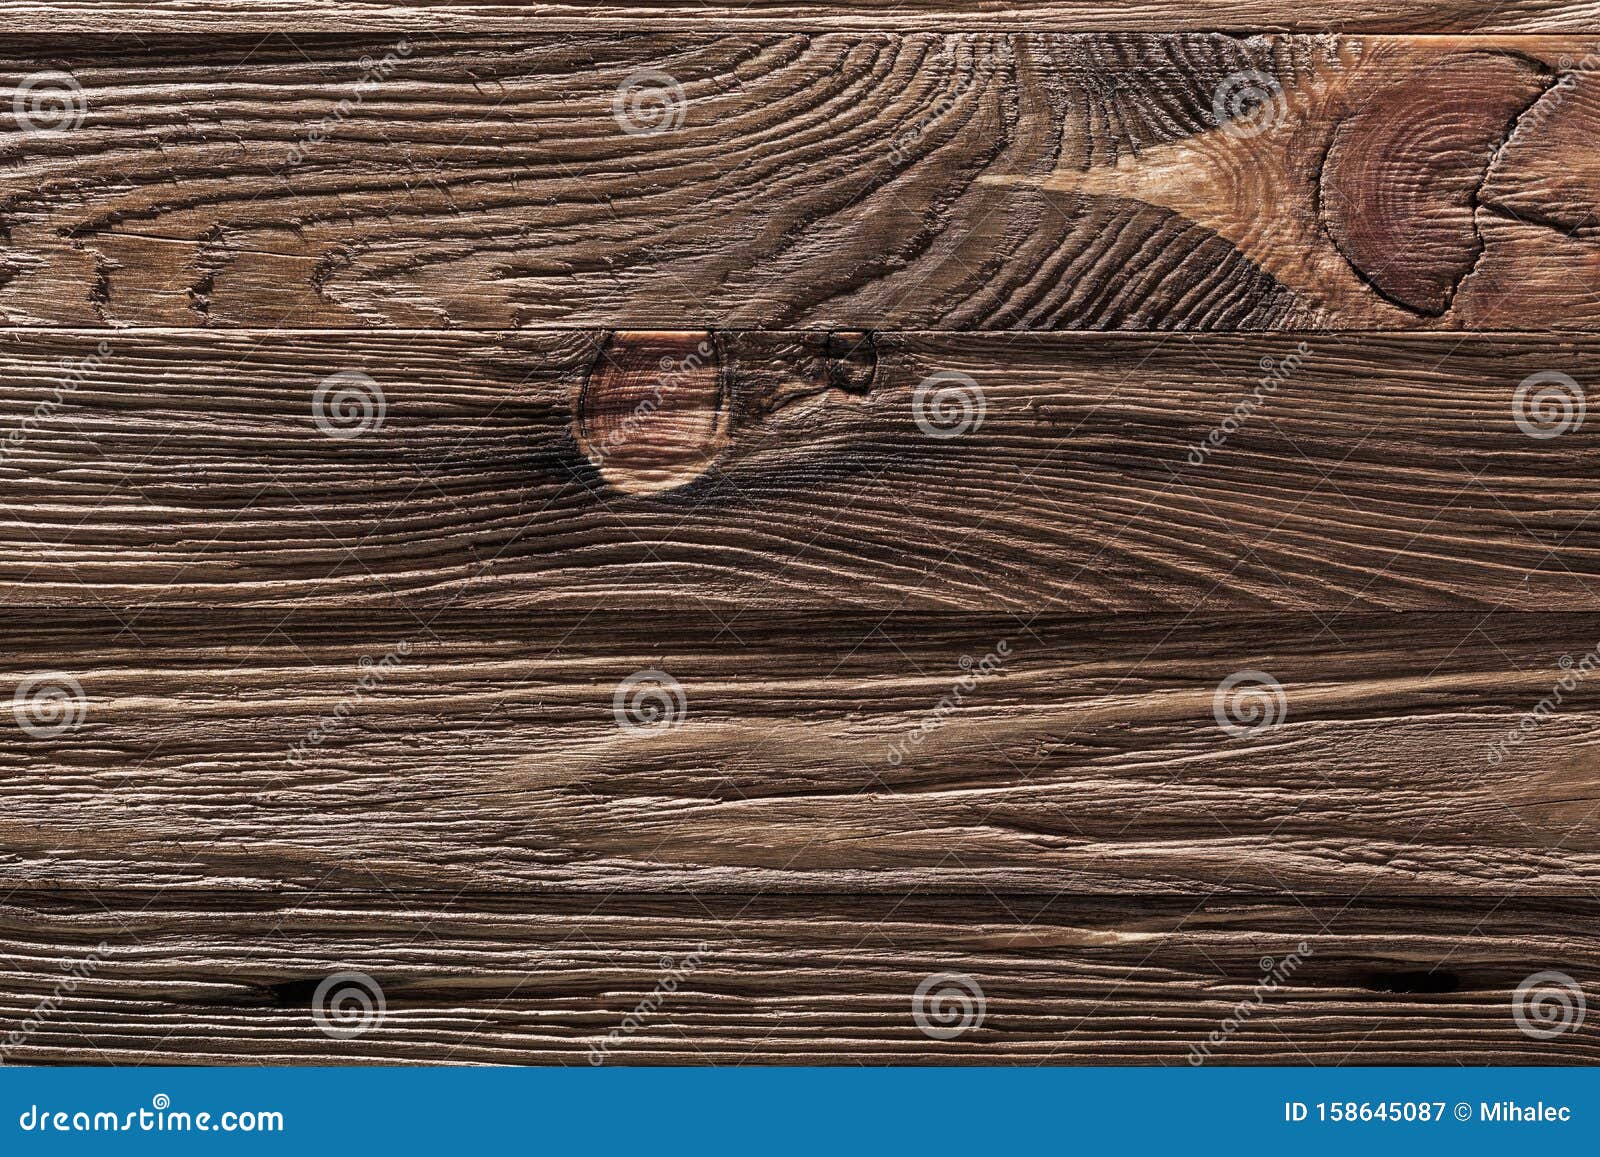 Vintage Brown Wood Texture Close Up Stock Image  Image of longstanding  